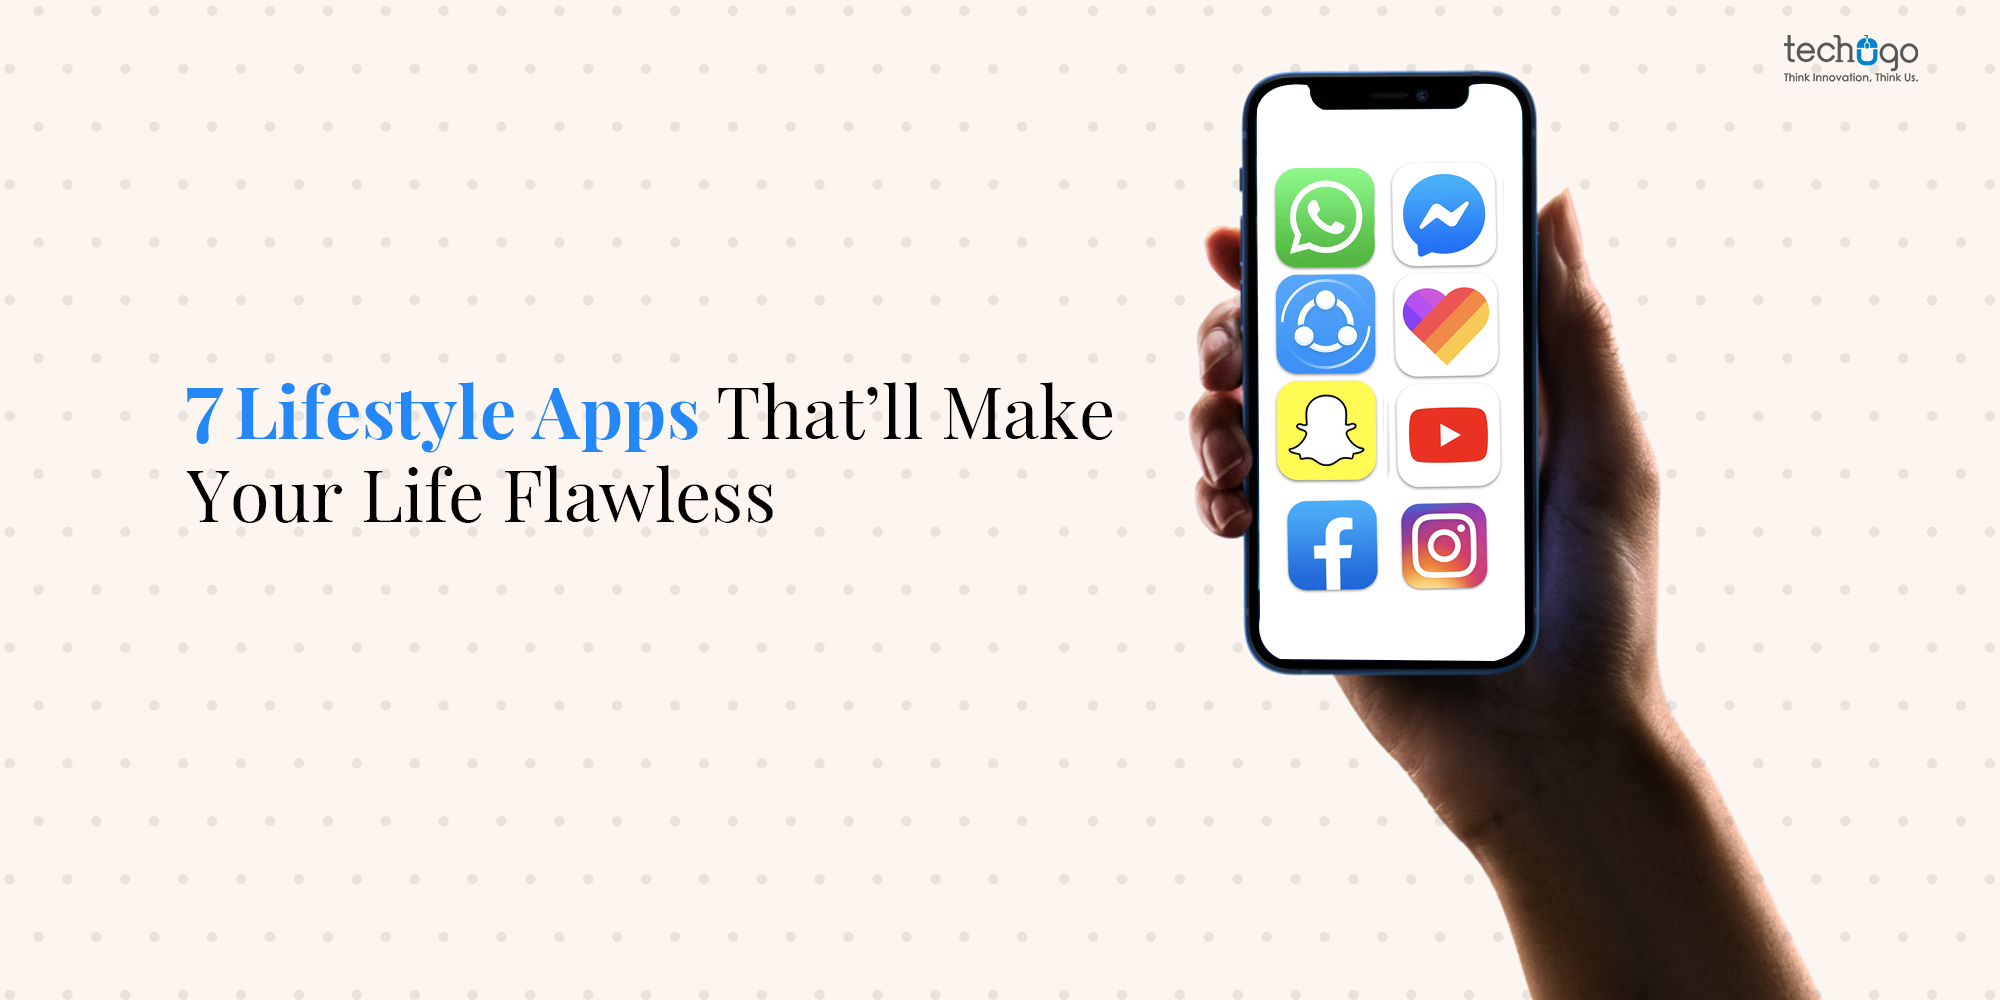 7 Lifestyle Apps That’ll Make Your Life Flawless